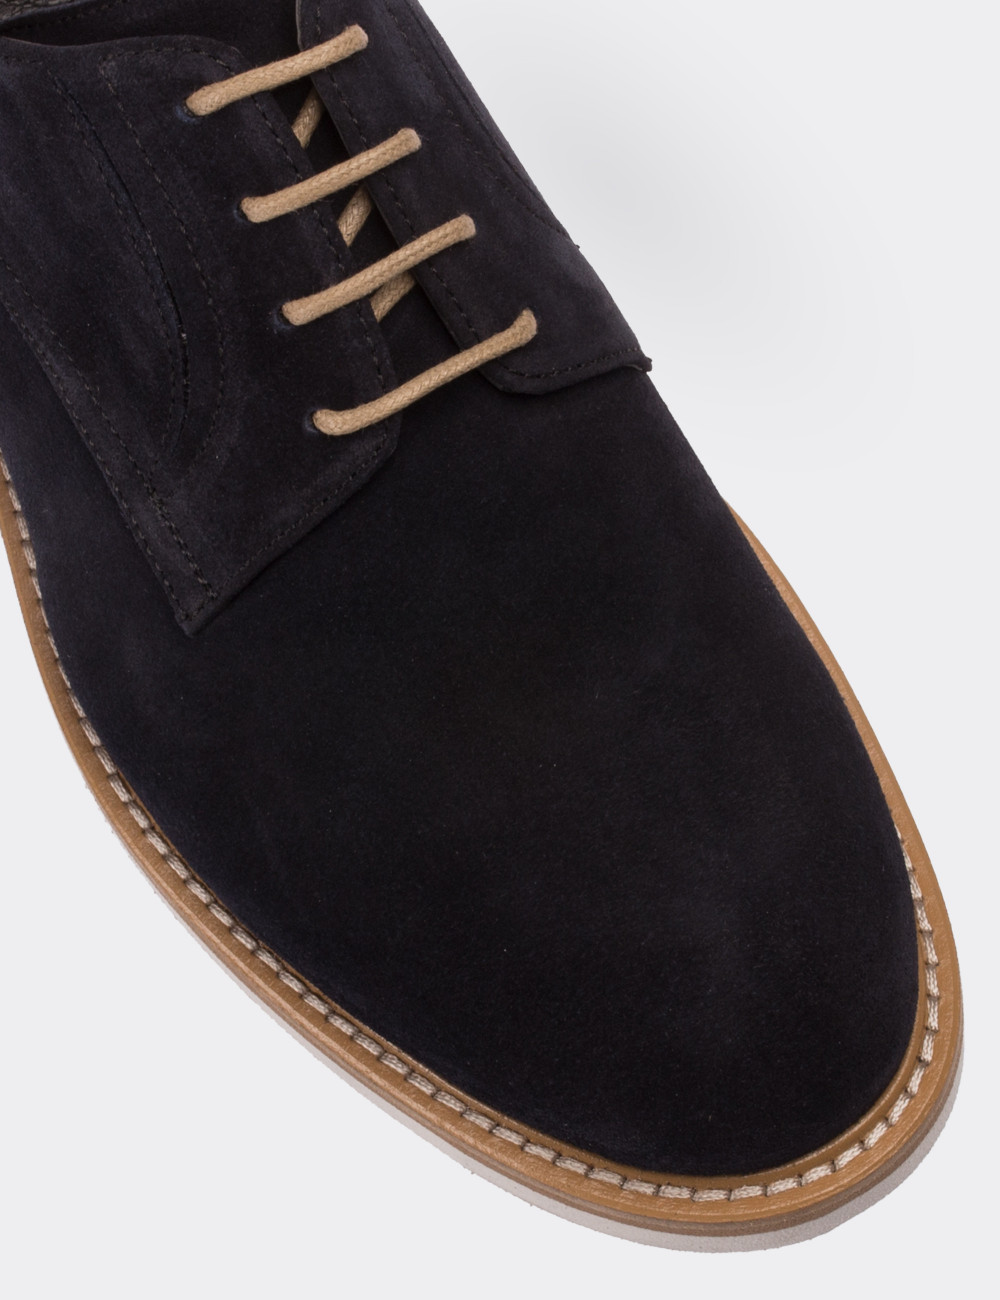 Navy Suede Leather Lace-up Shoes - 01294MLCVE08